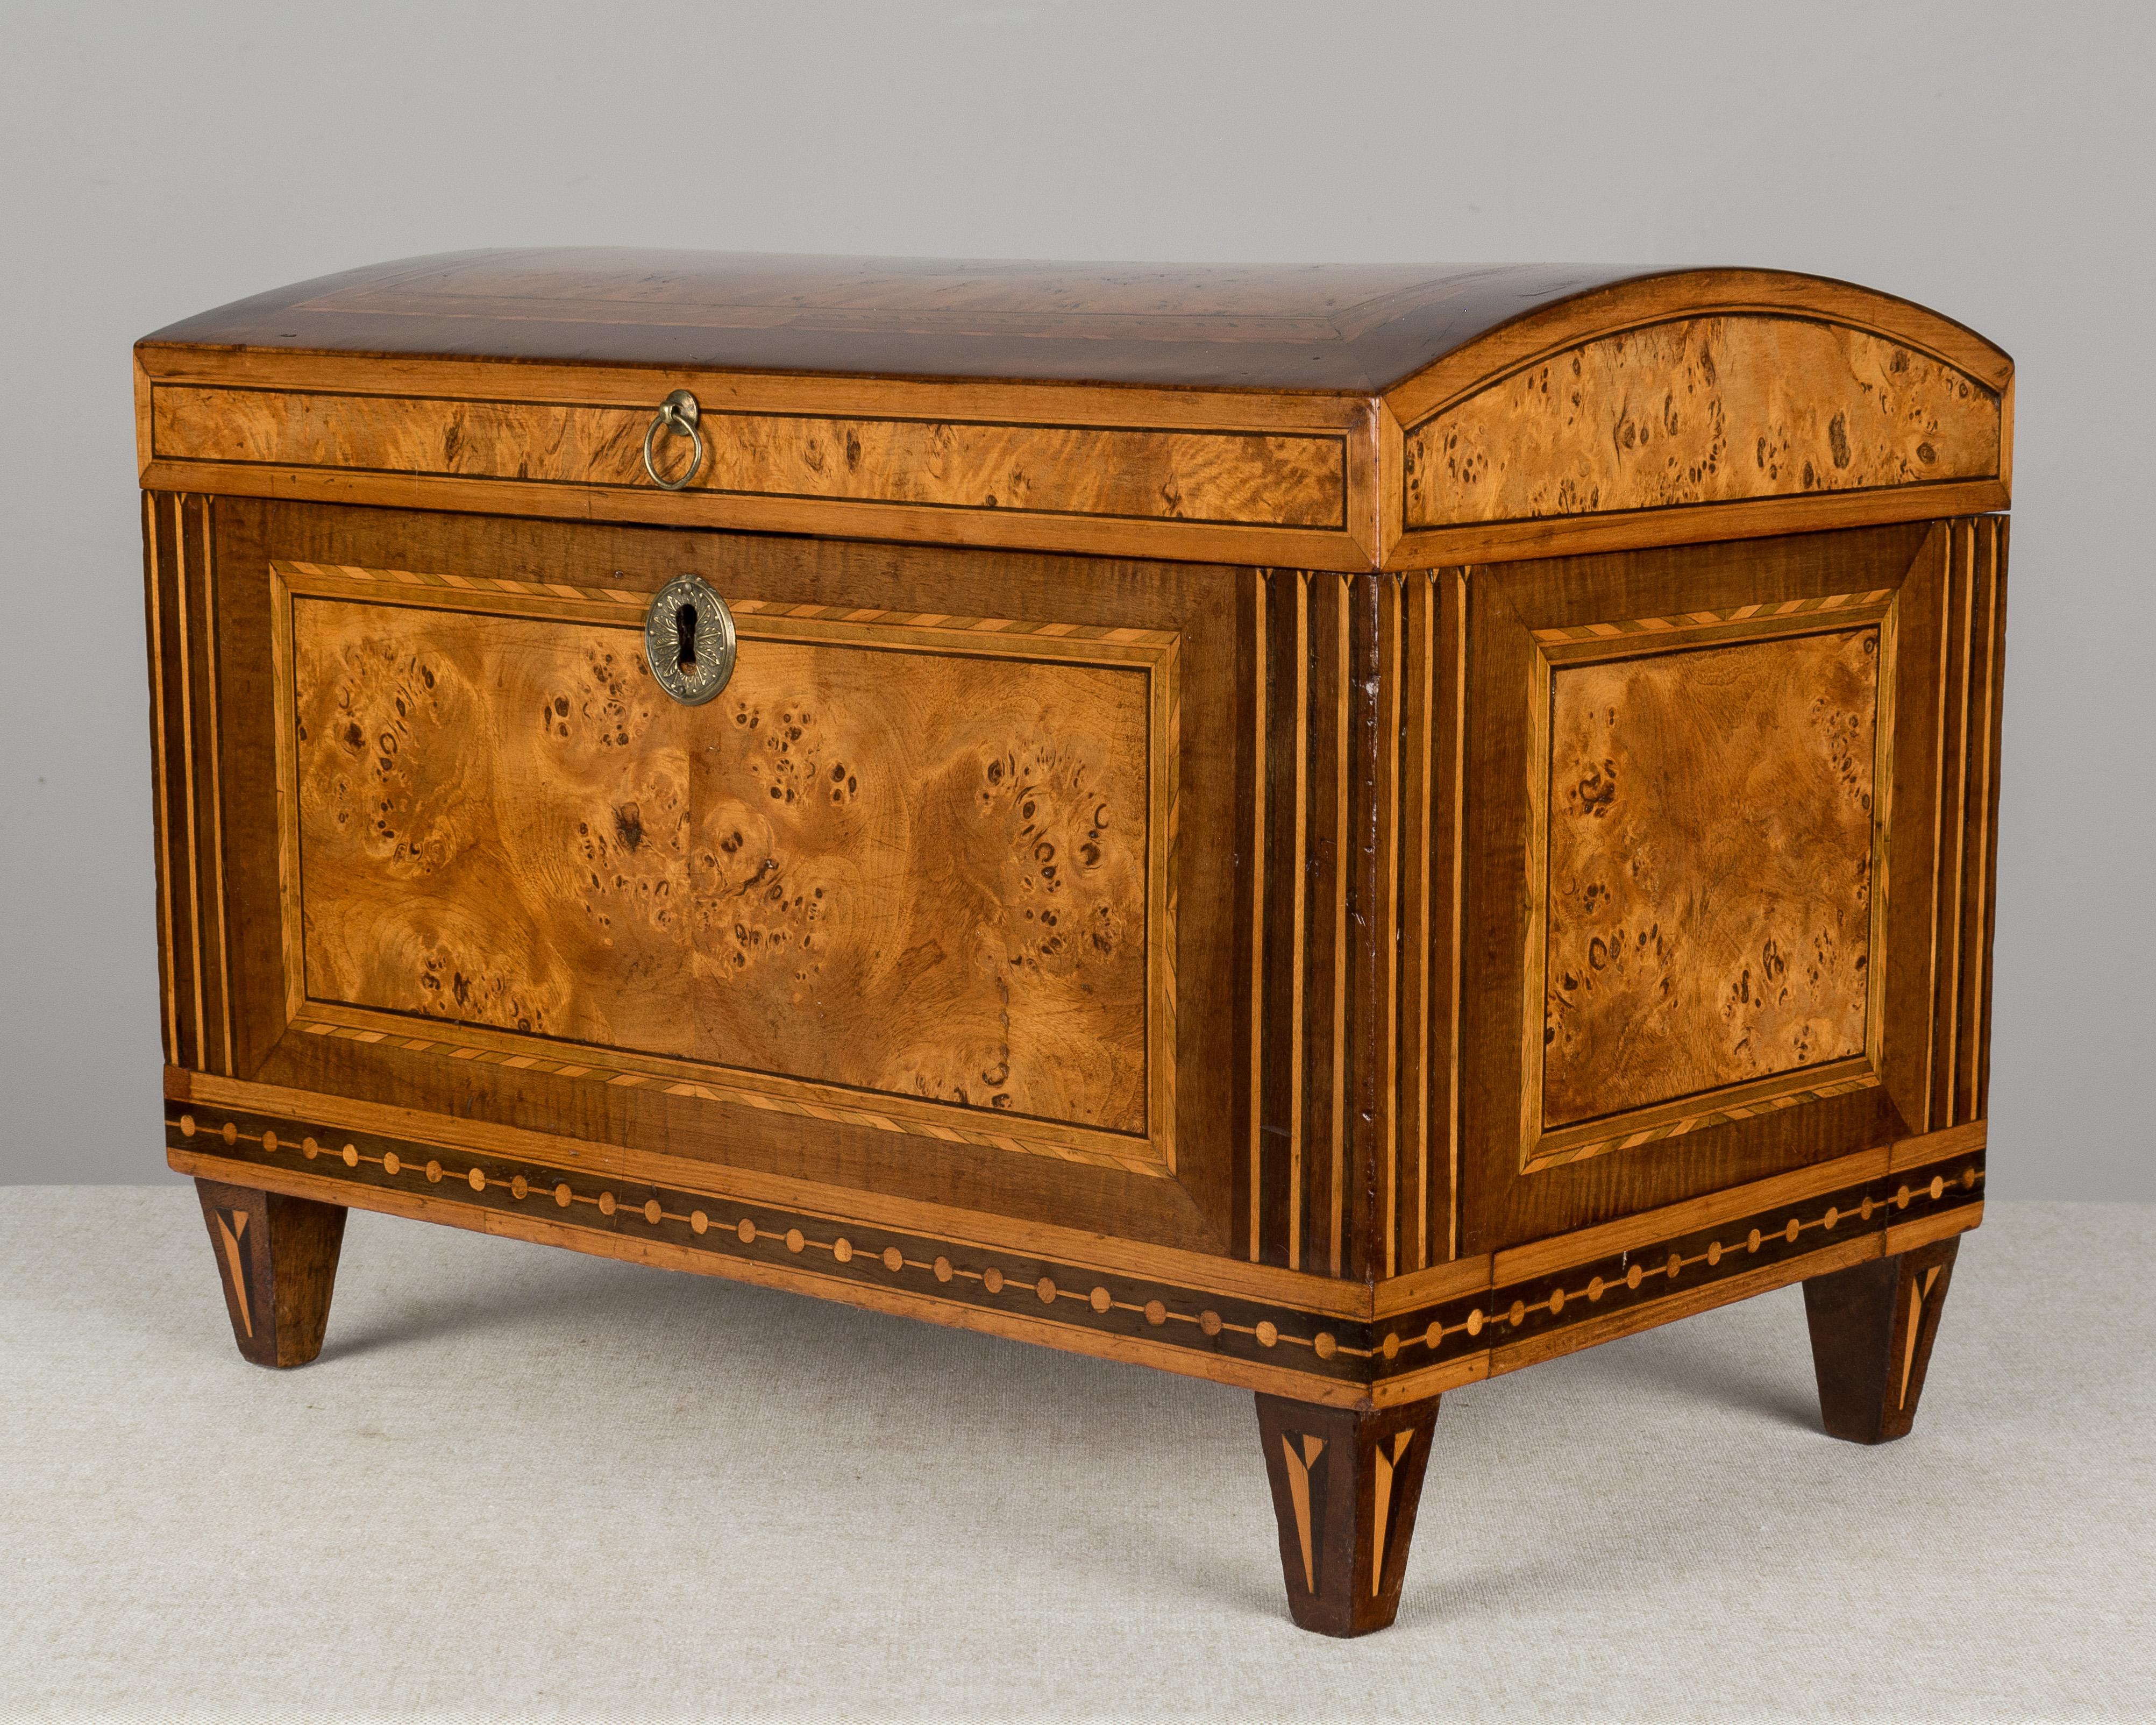 19th Century Italian Marquetry Box In Good Condition For Sale In Winter Park, FL